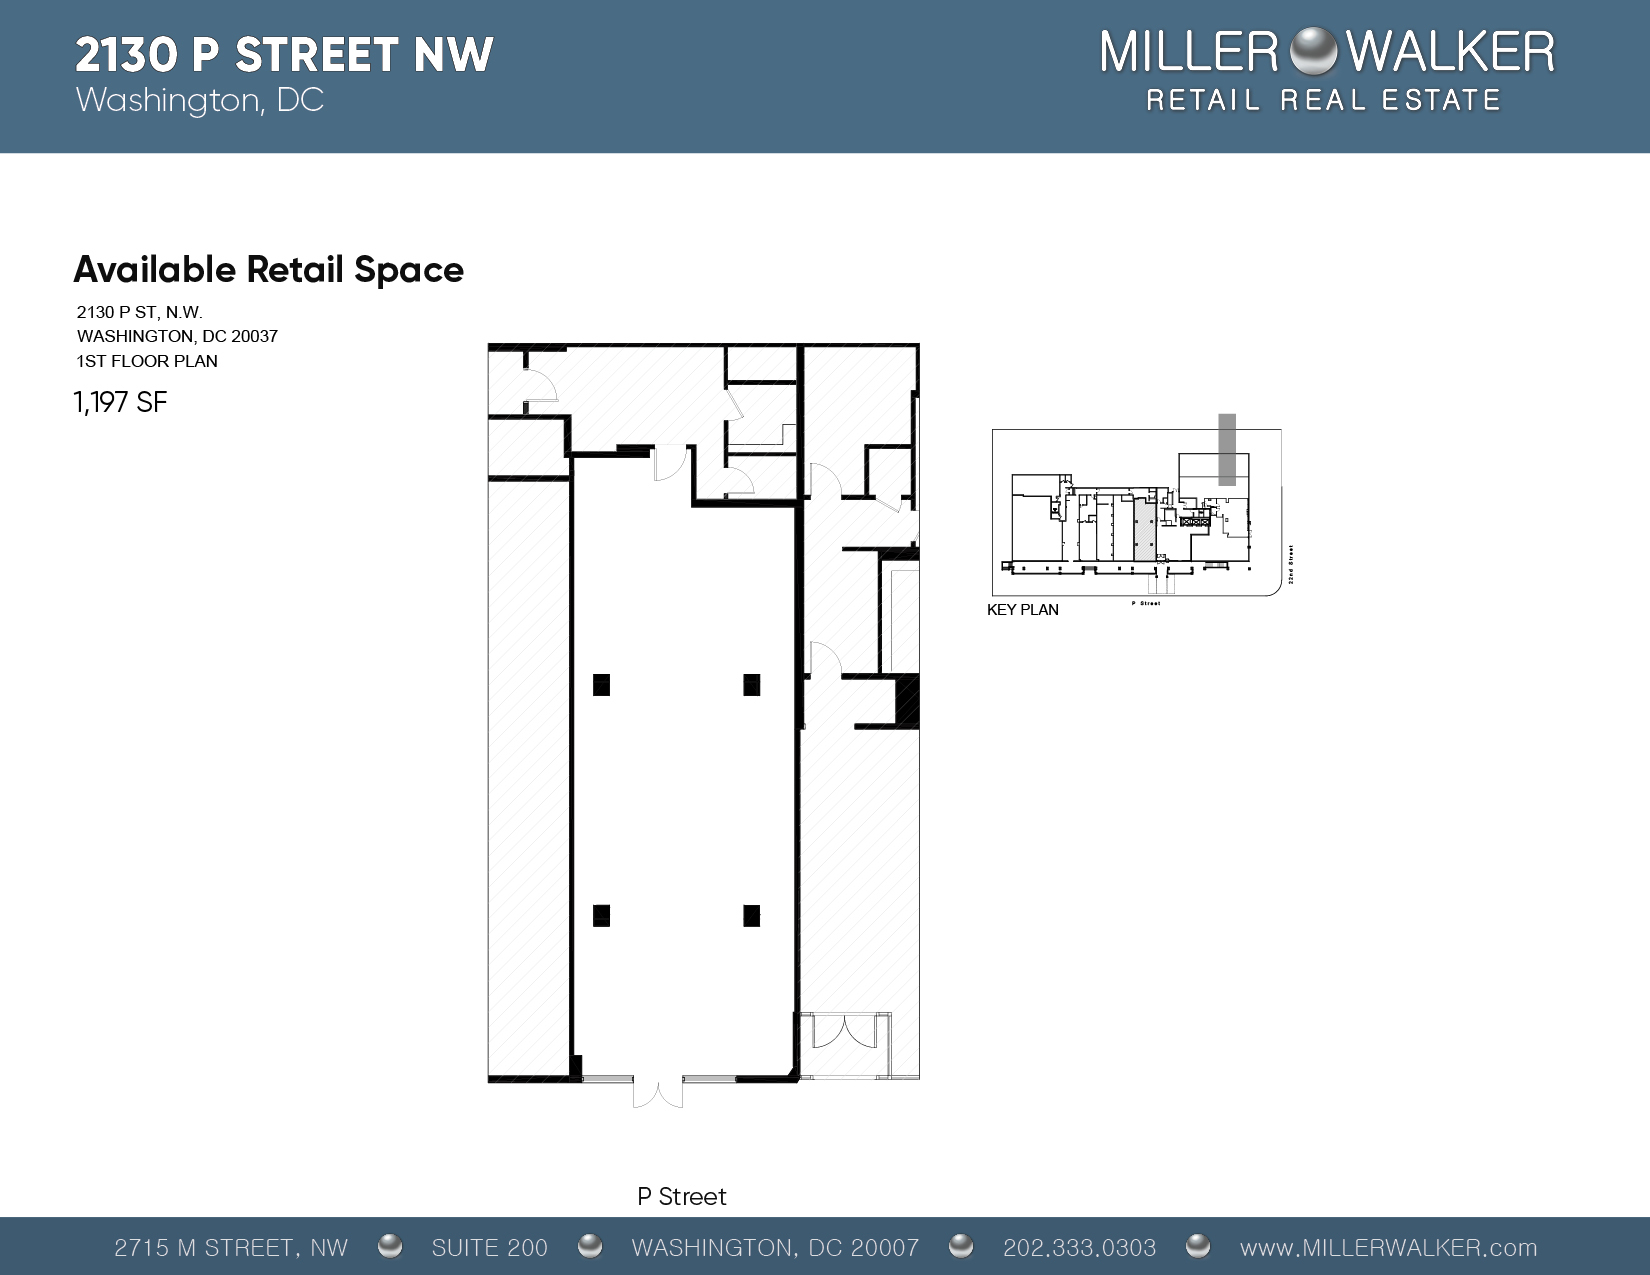 Restaurant and Retail Space for Lease DC - 2130 P Street - Dupont Circle restaurant space for lease floor plan 3